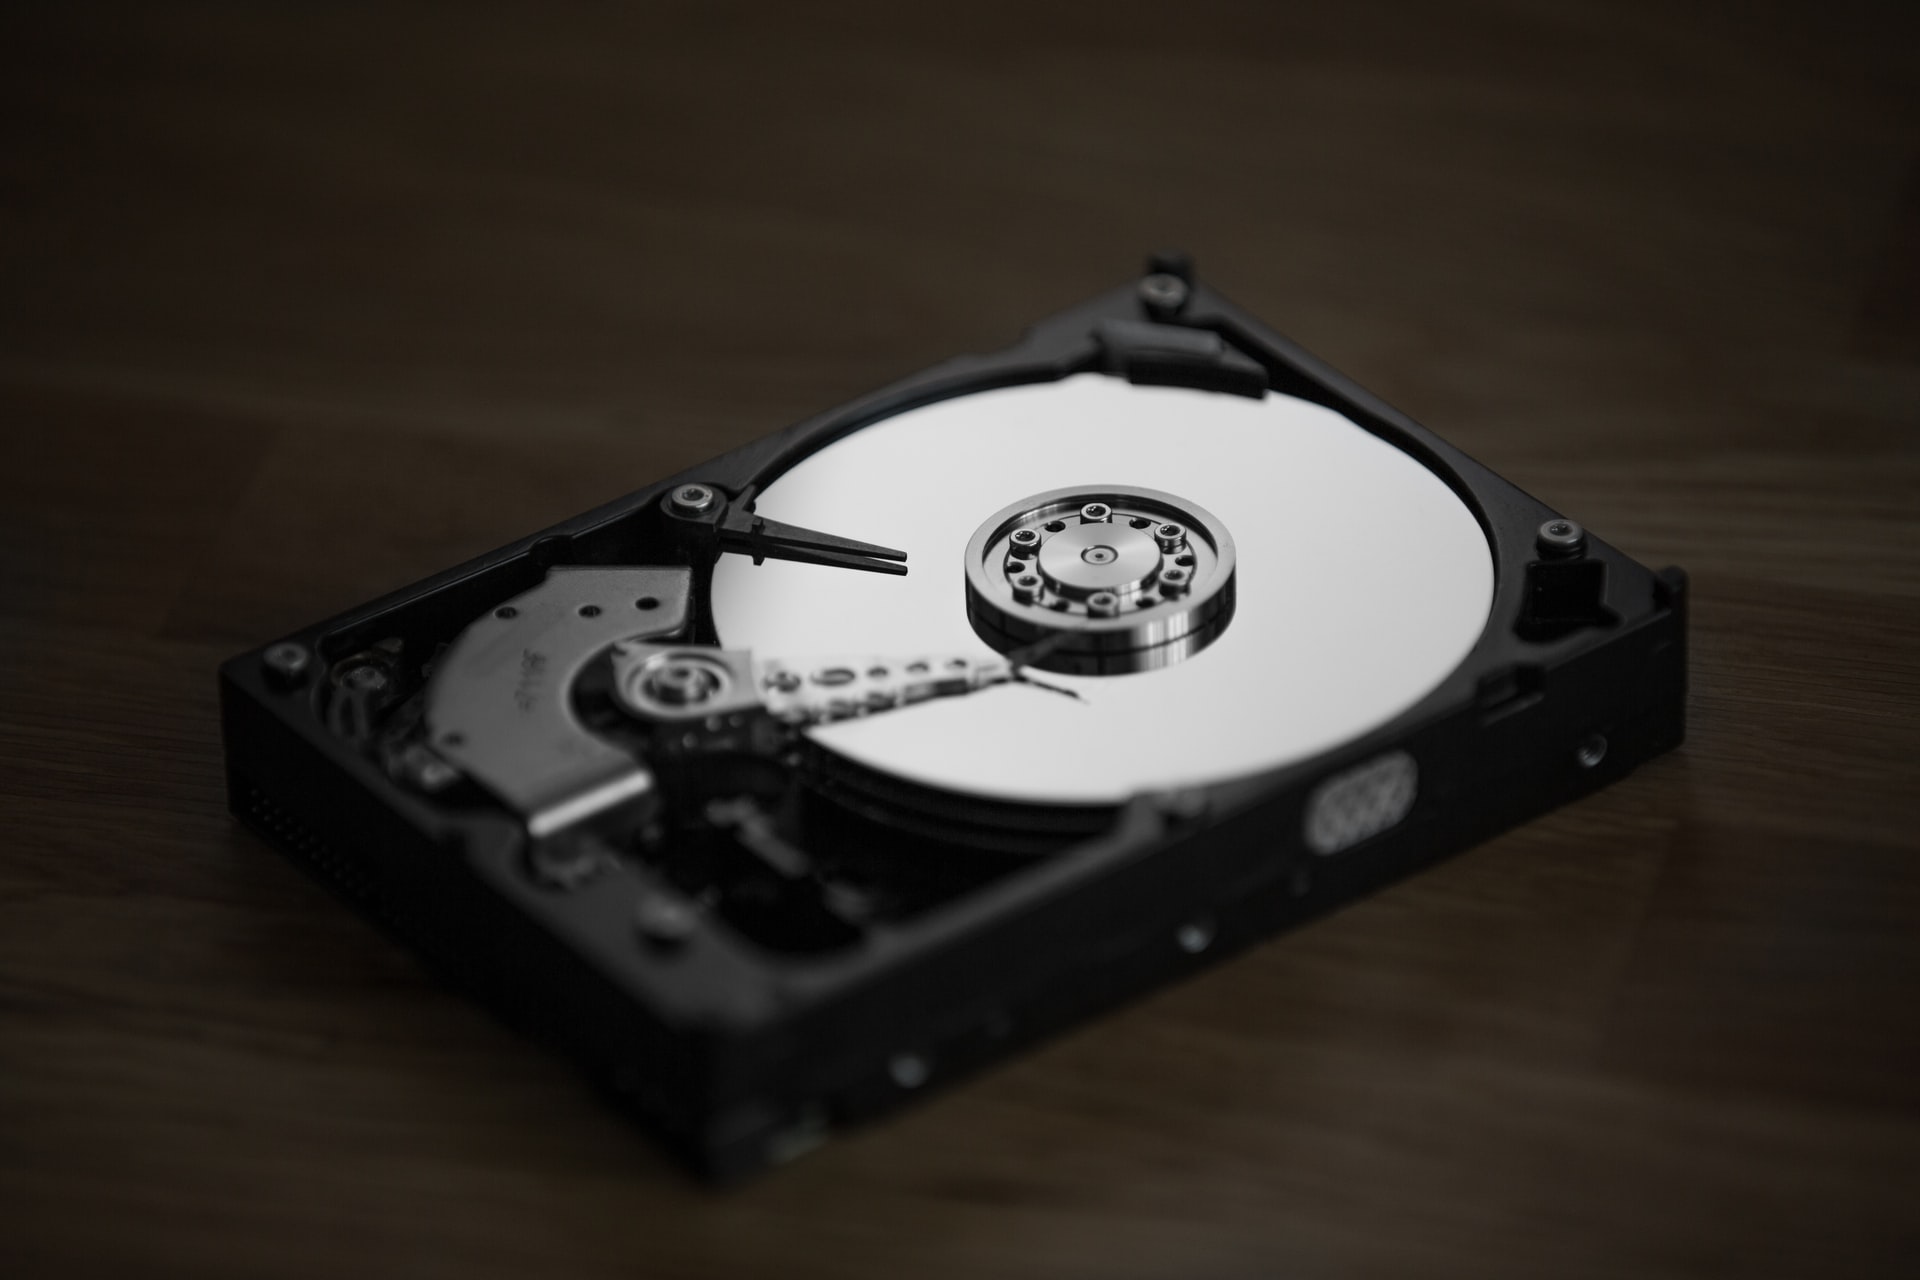 Black and silver hard drive